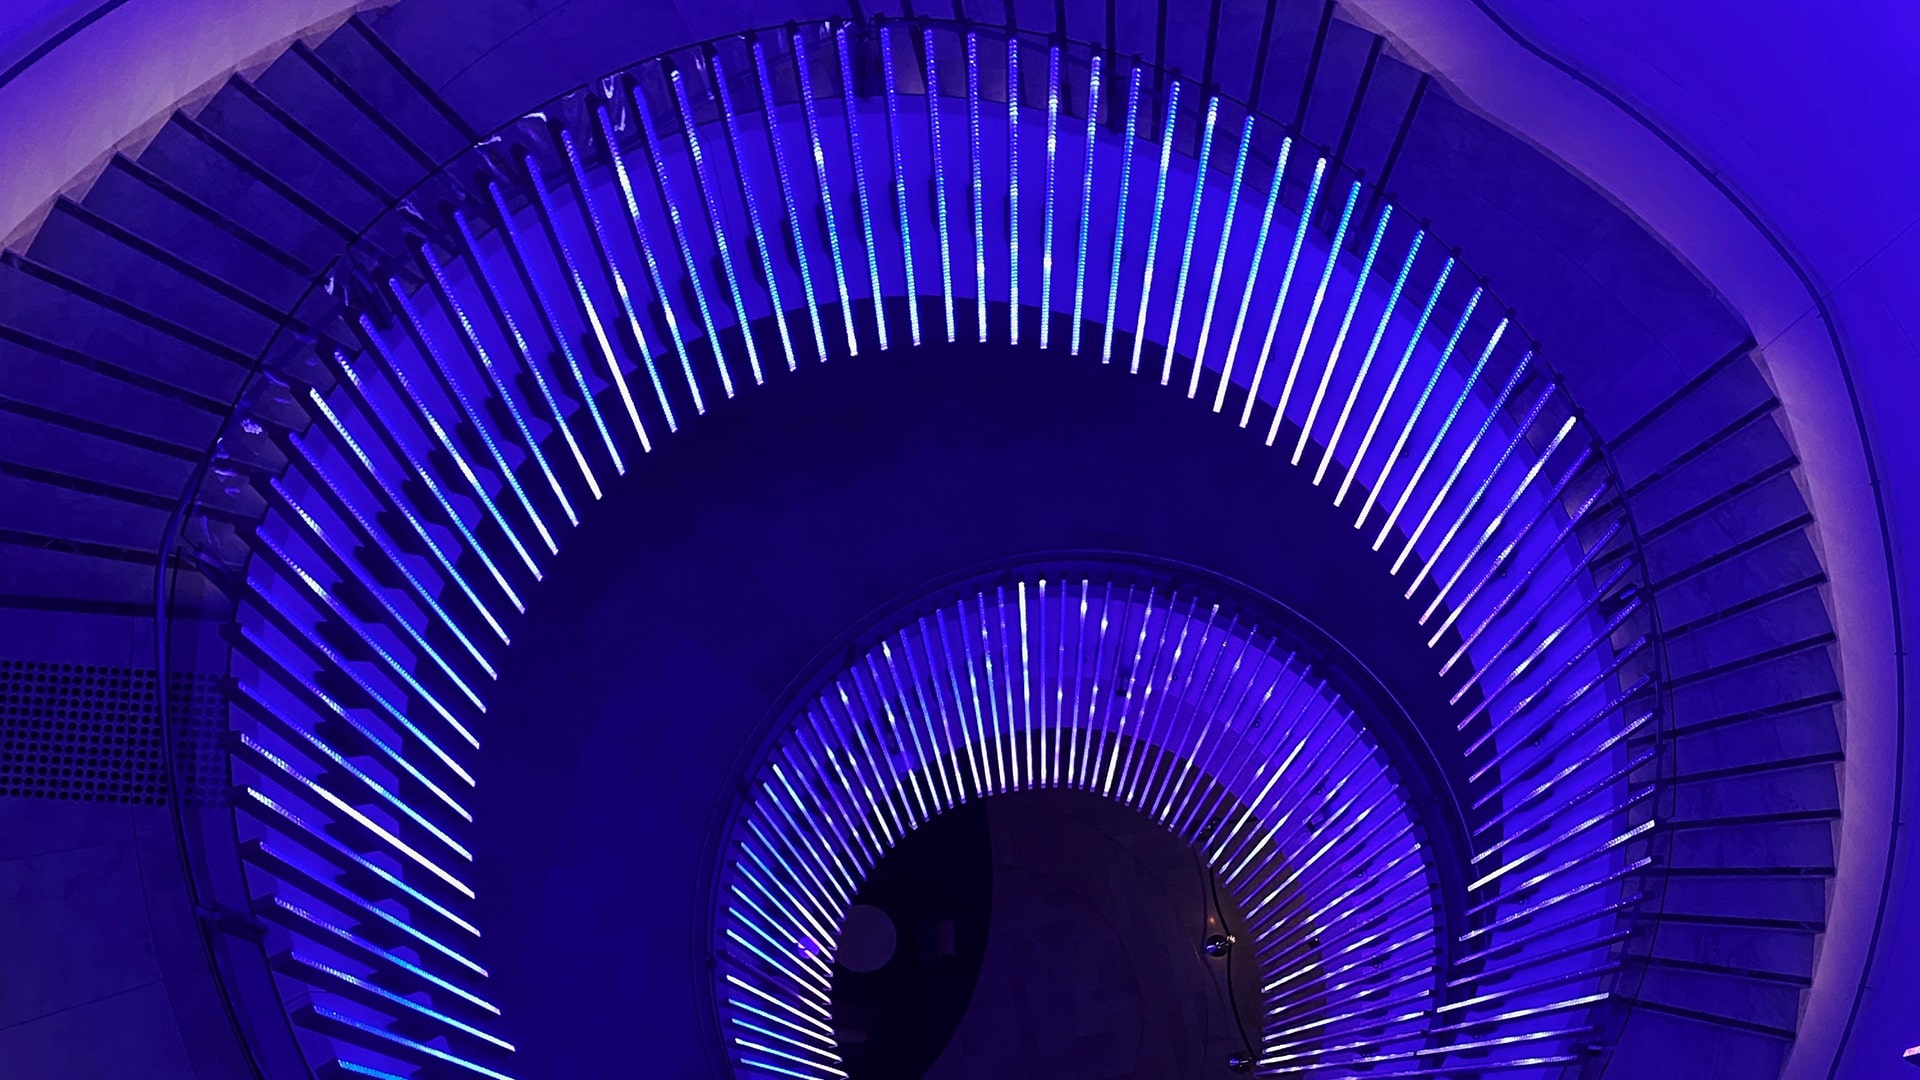 Spiralling staircase railings at night, illuminated in neon blue light. 